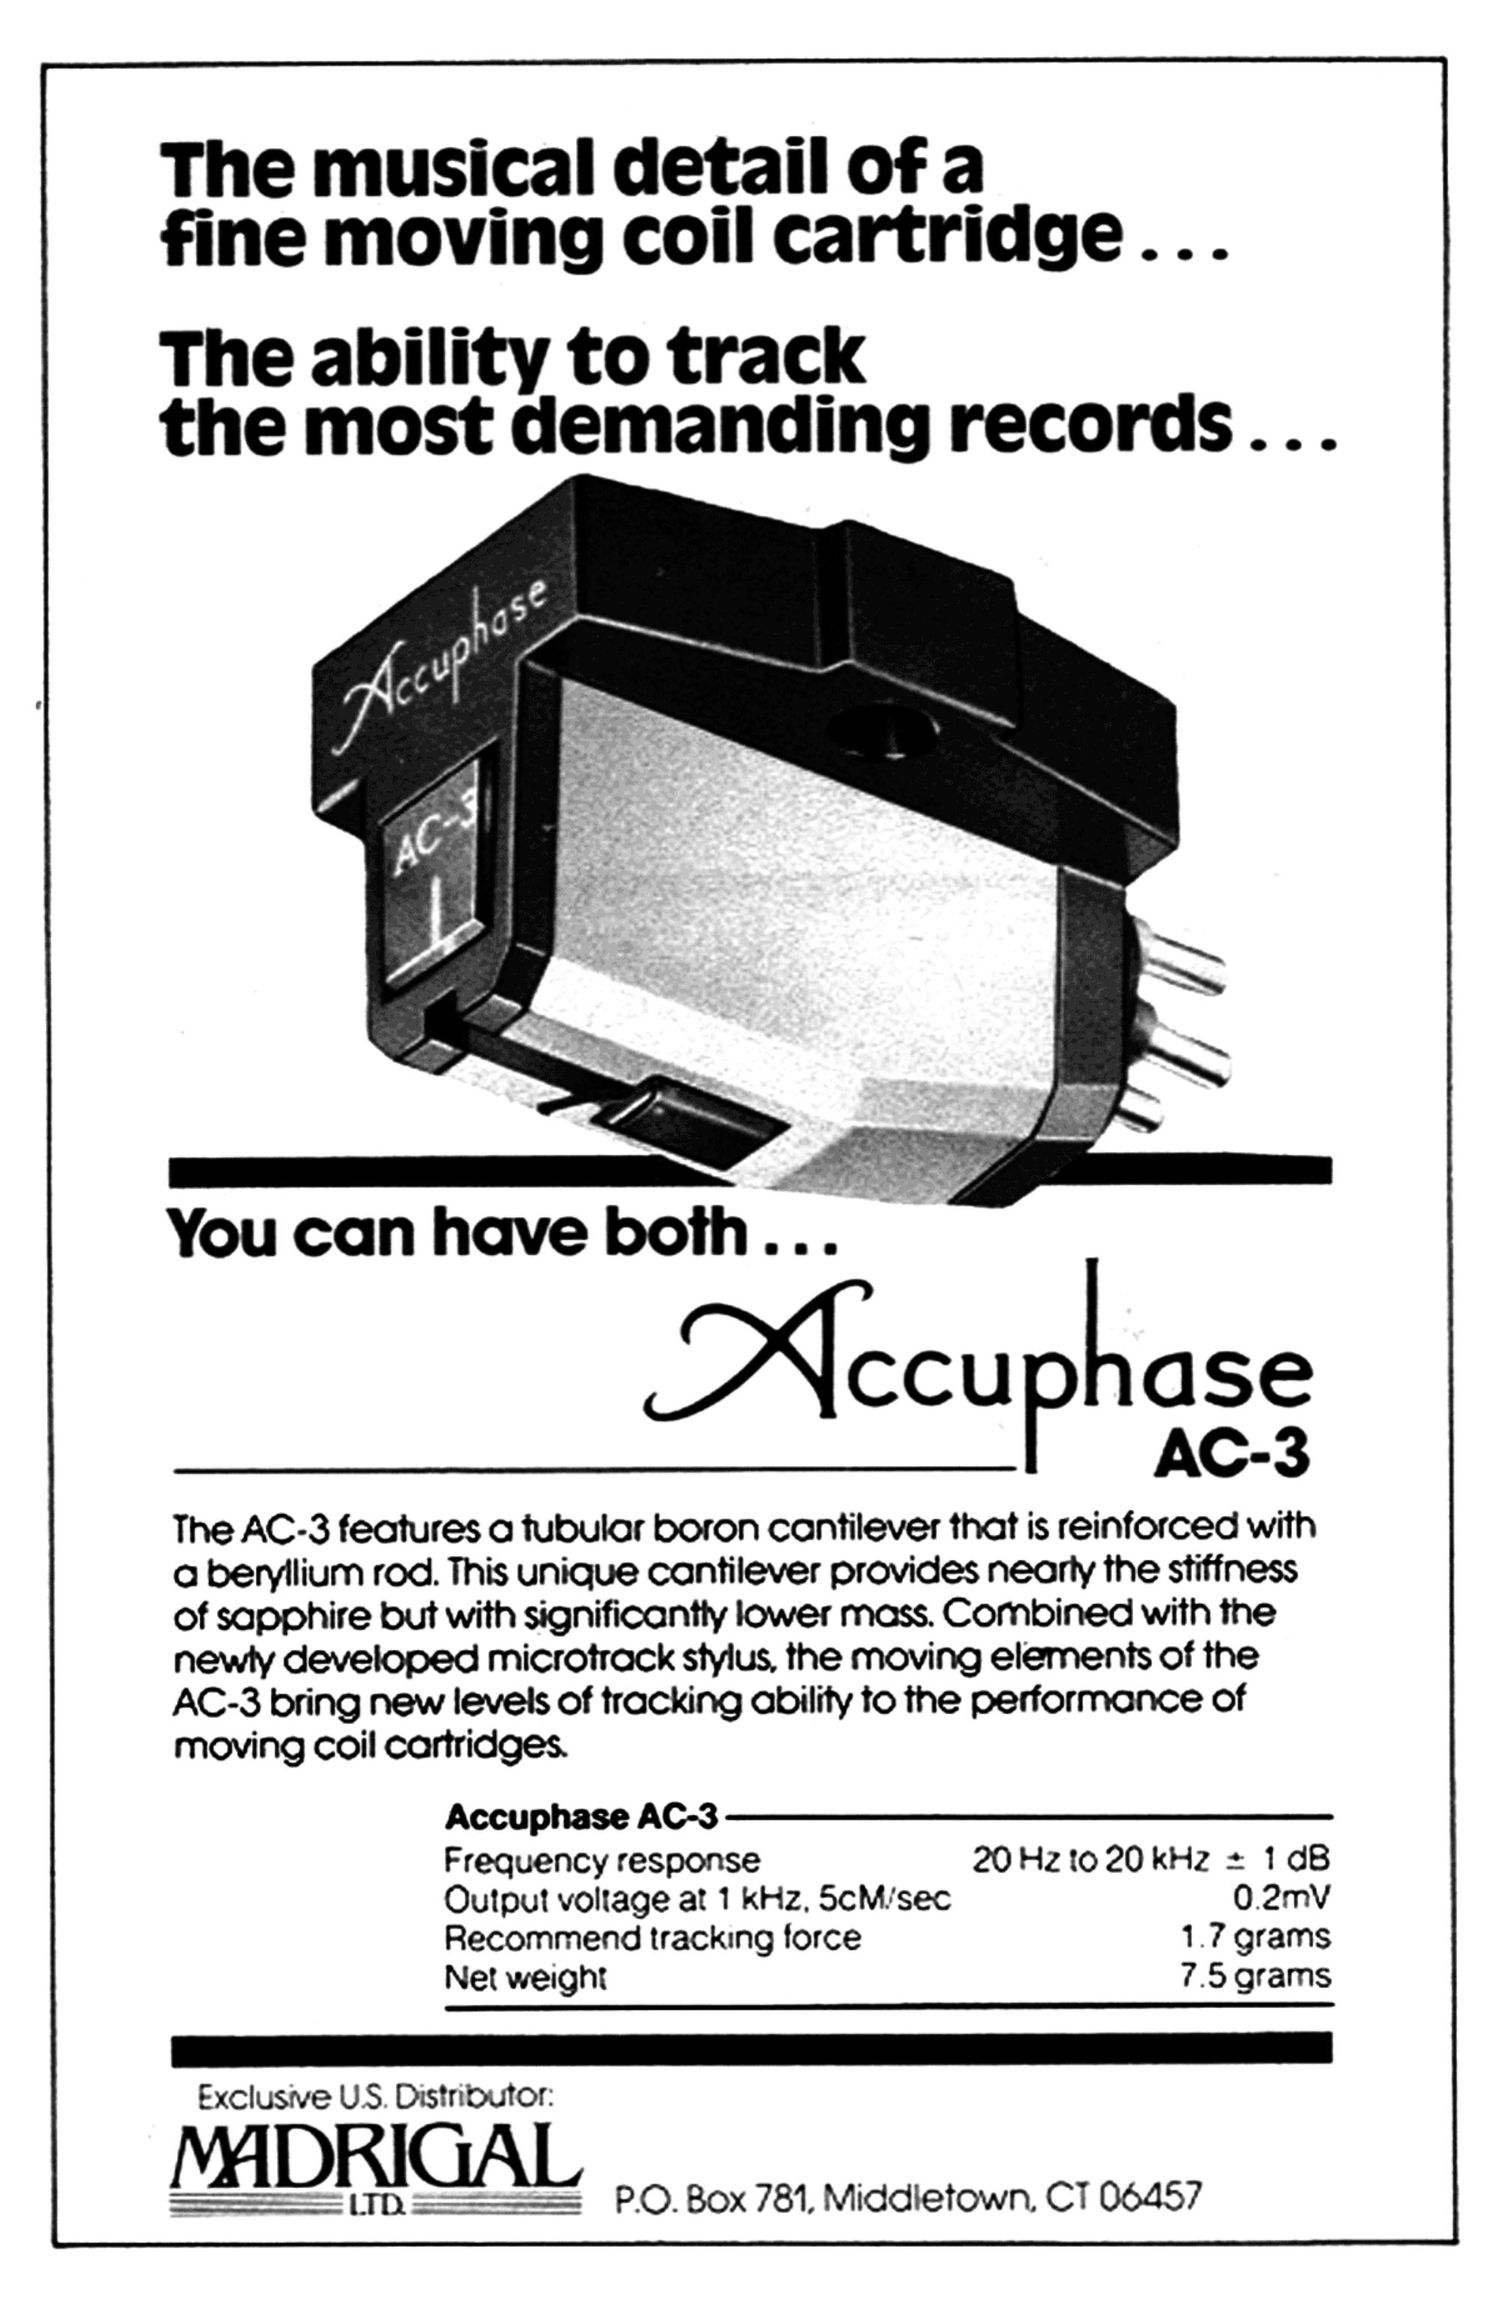 accuphase ac 3 brochure